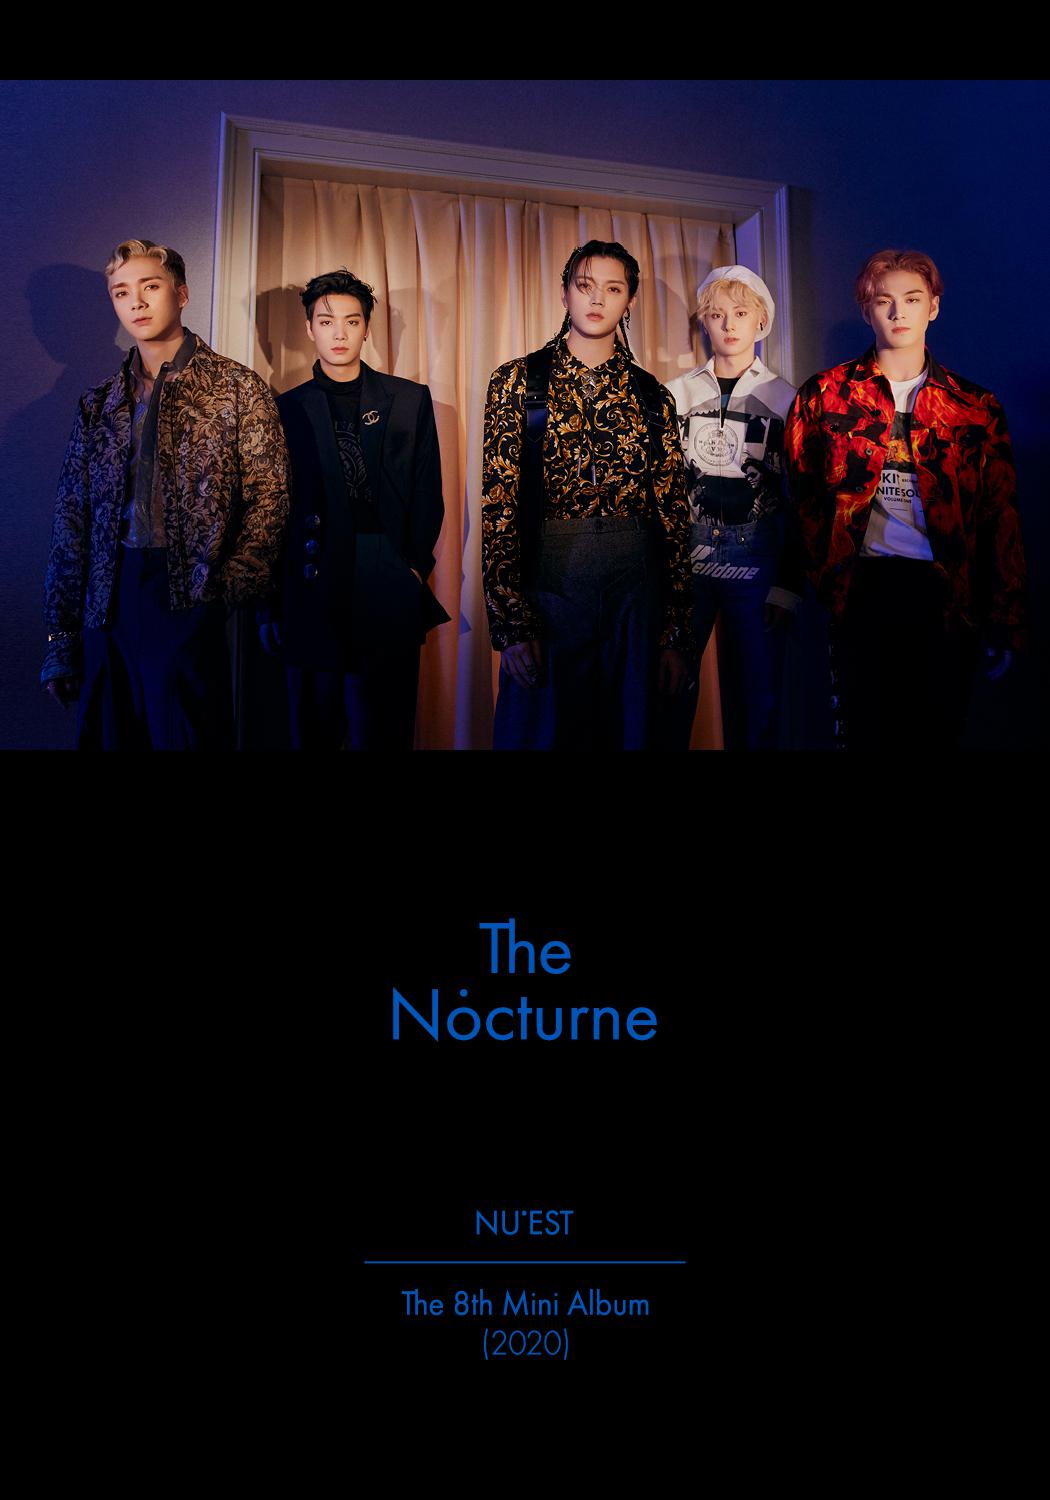 nuest-members-release-the-nocturne-teaser-image-and-trailer-6